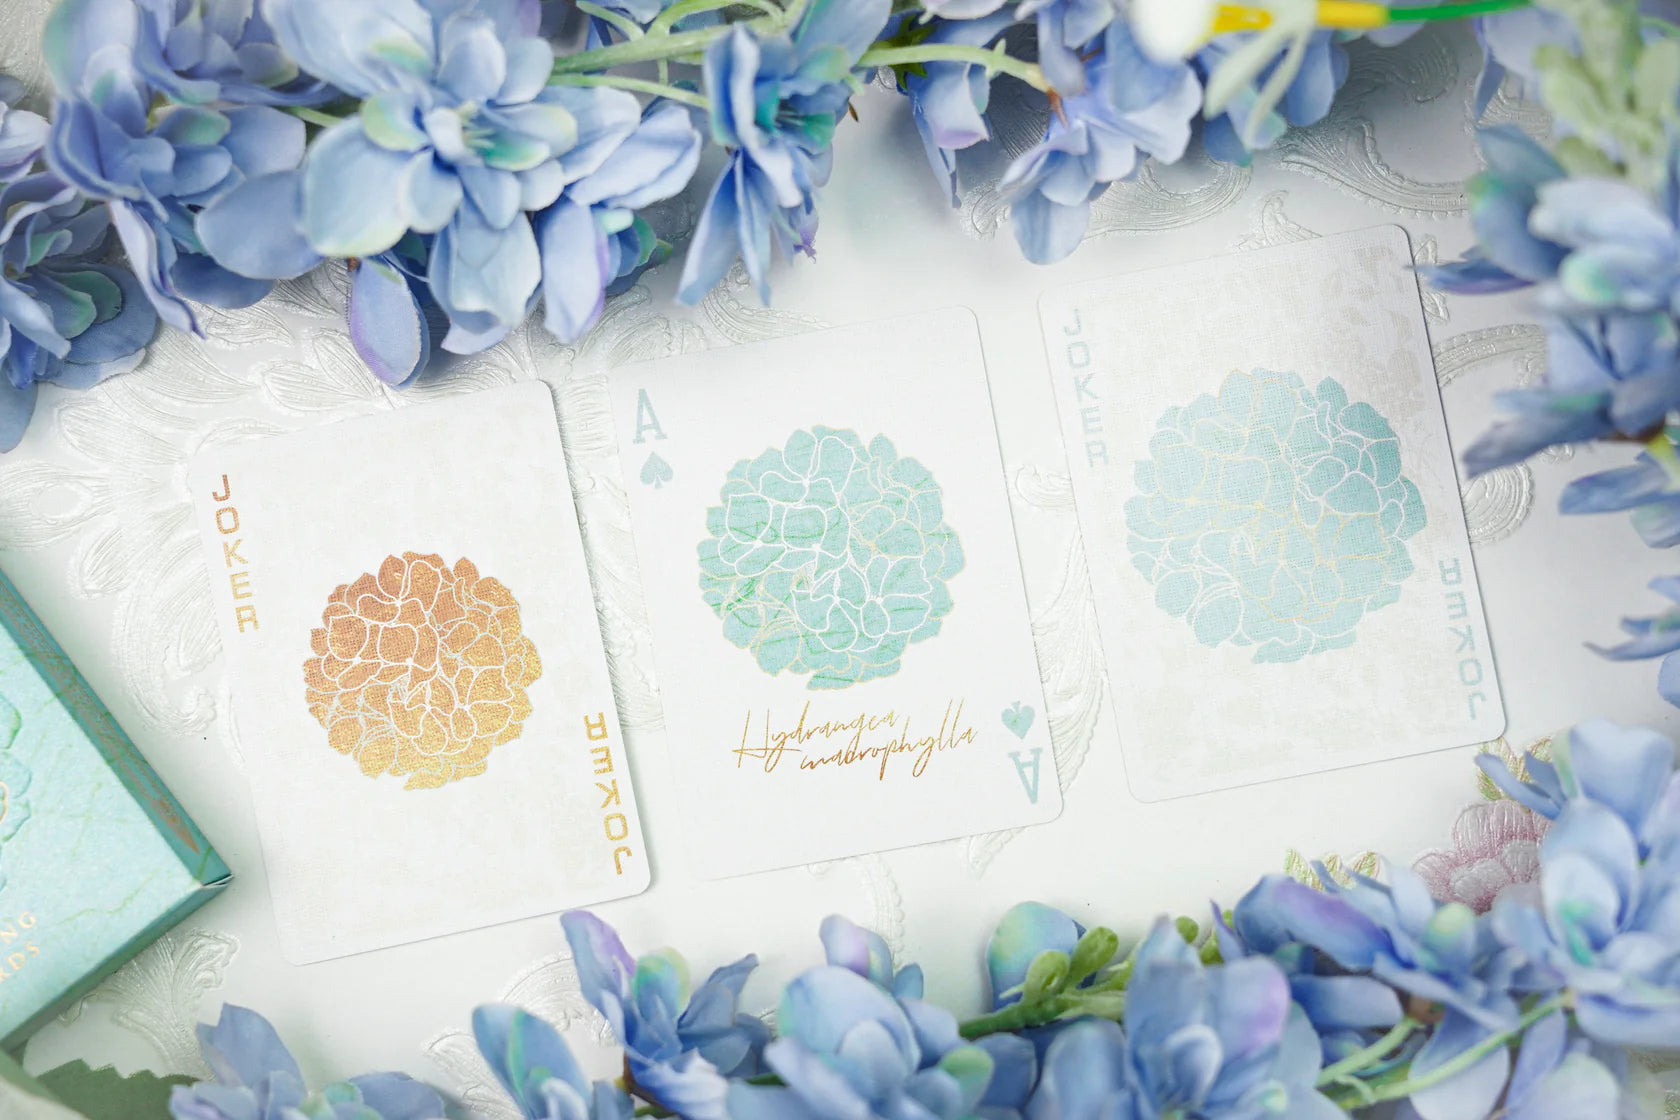 The Language of Flowers Complete Set by NANA Studio